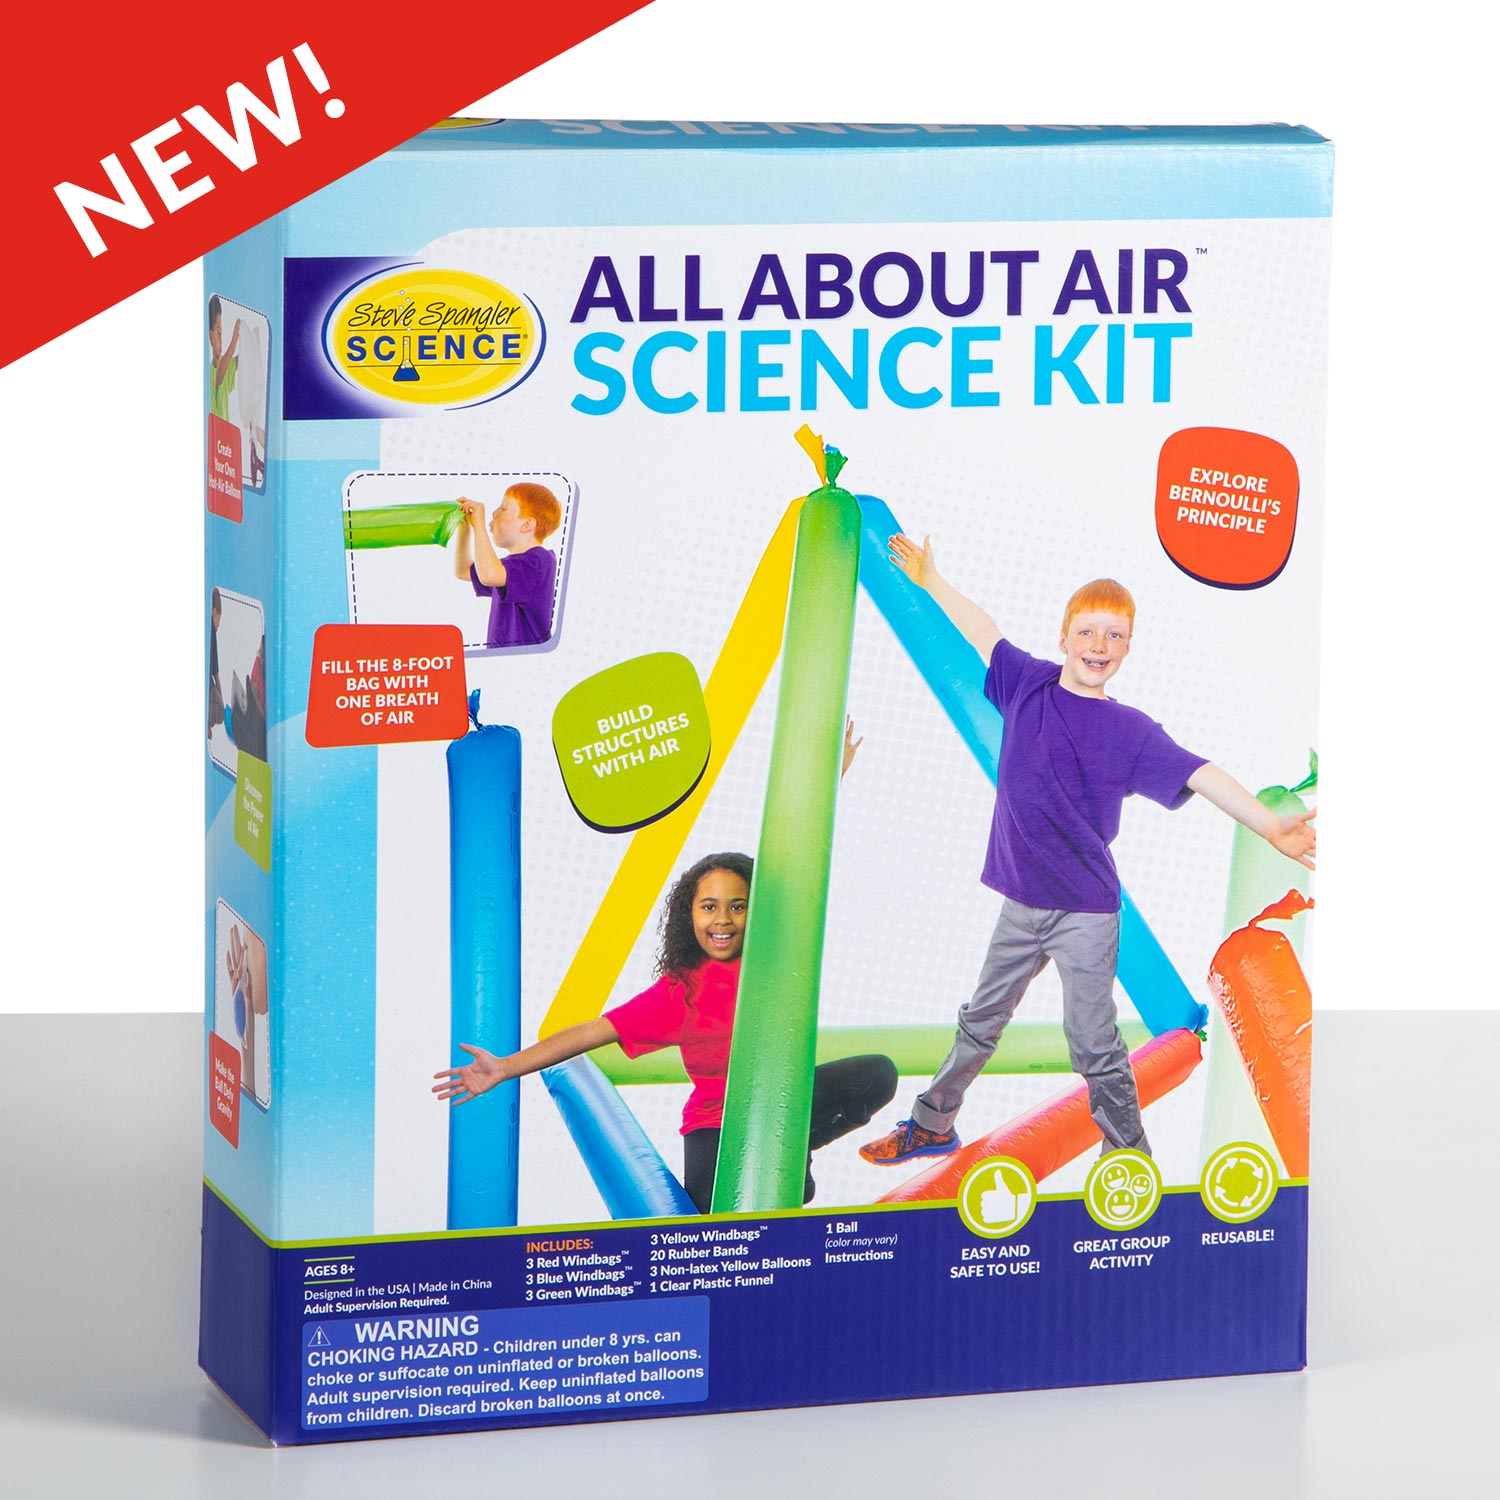 All About Air Science Kit